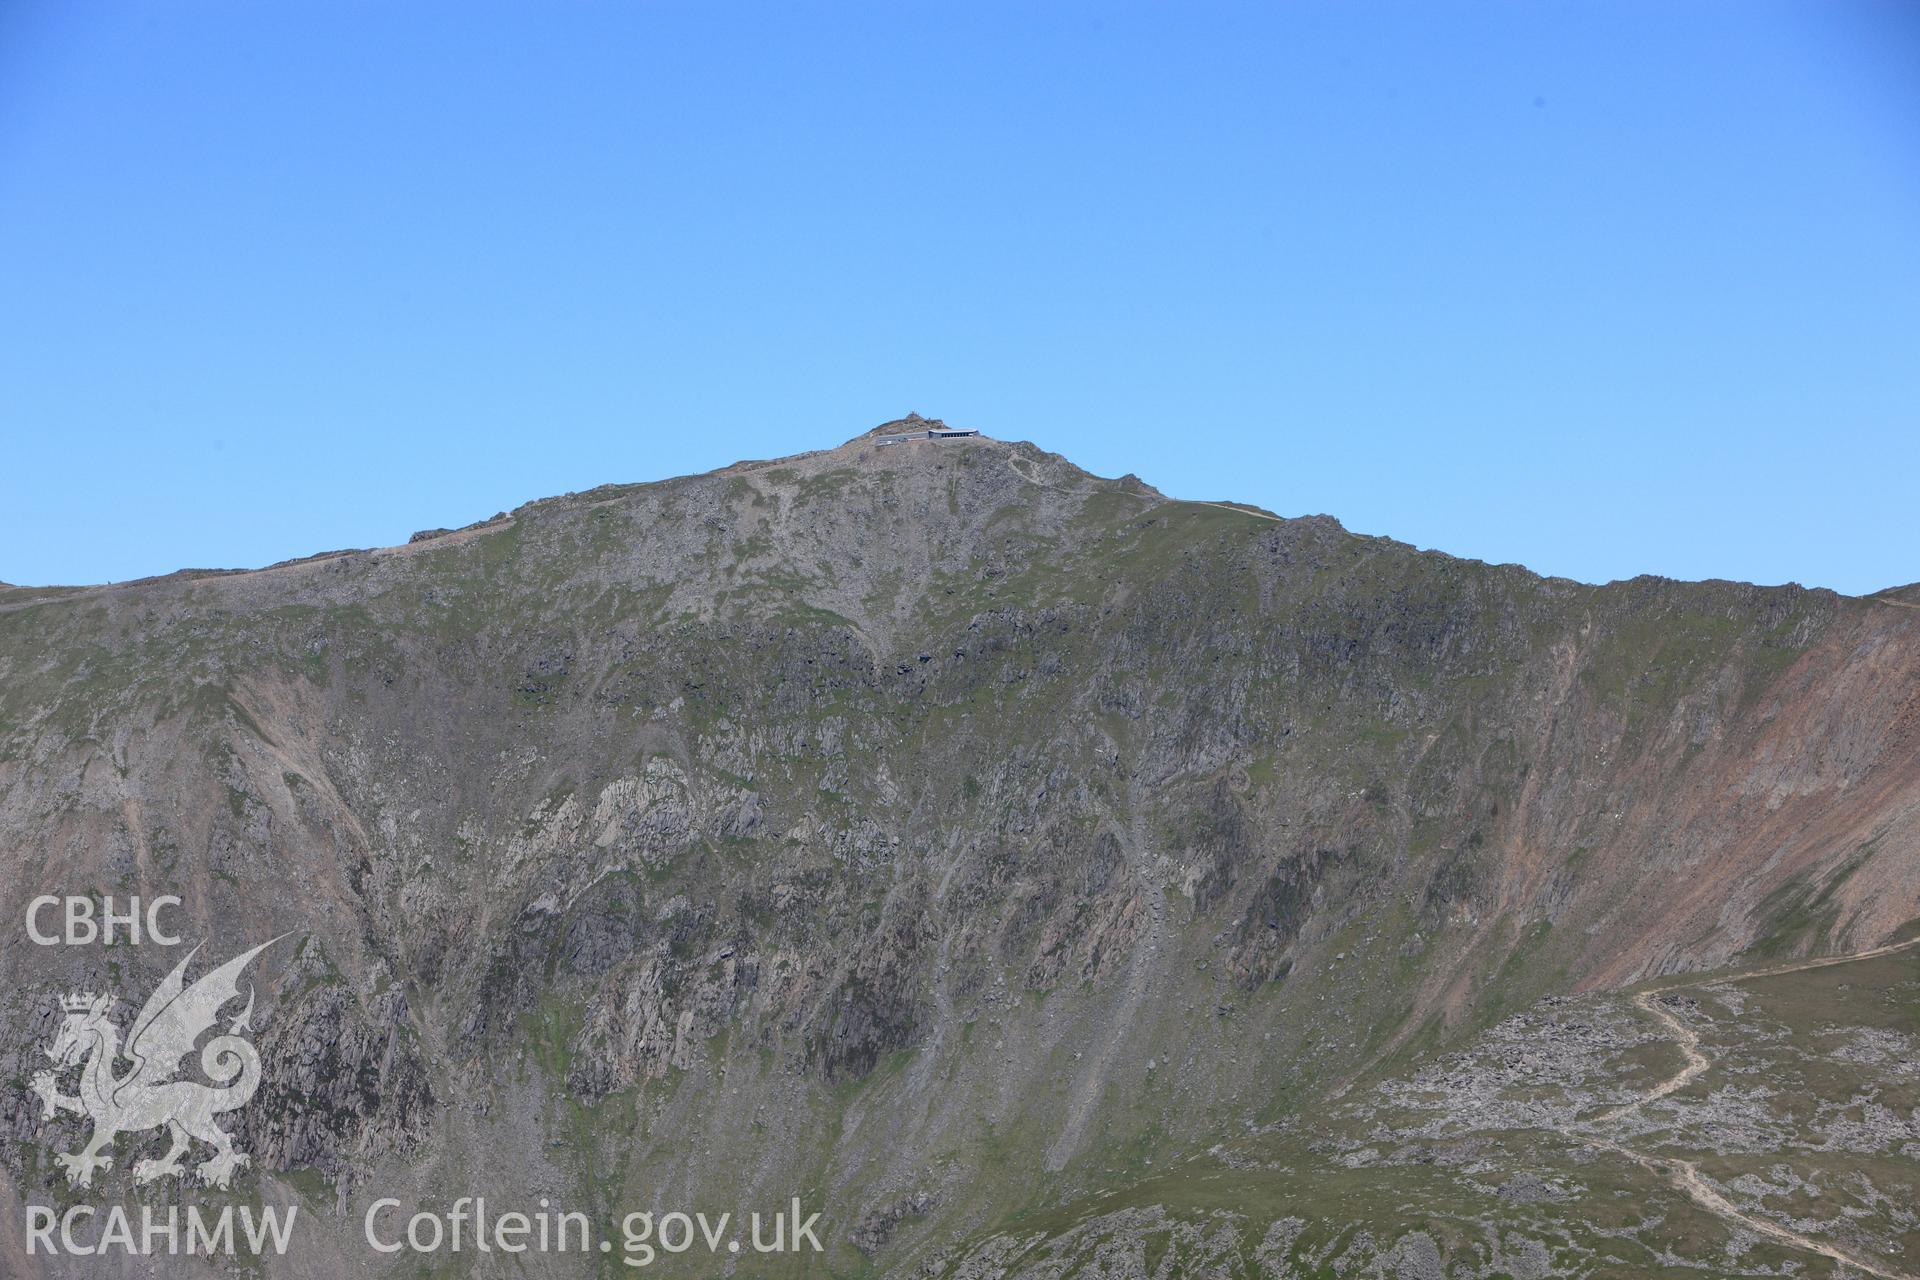 RCAHMW colour oblique photograph of Snowdon summit with railway terminus. Taken by Toby Driver on 16/06/2010.